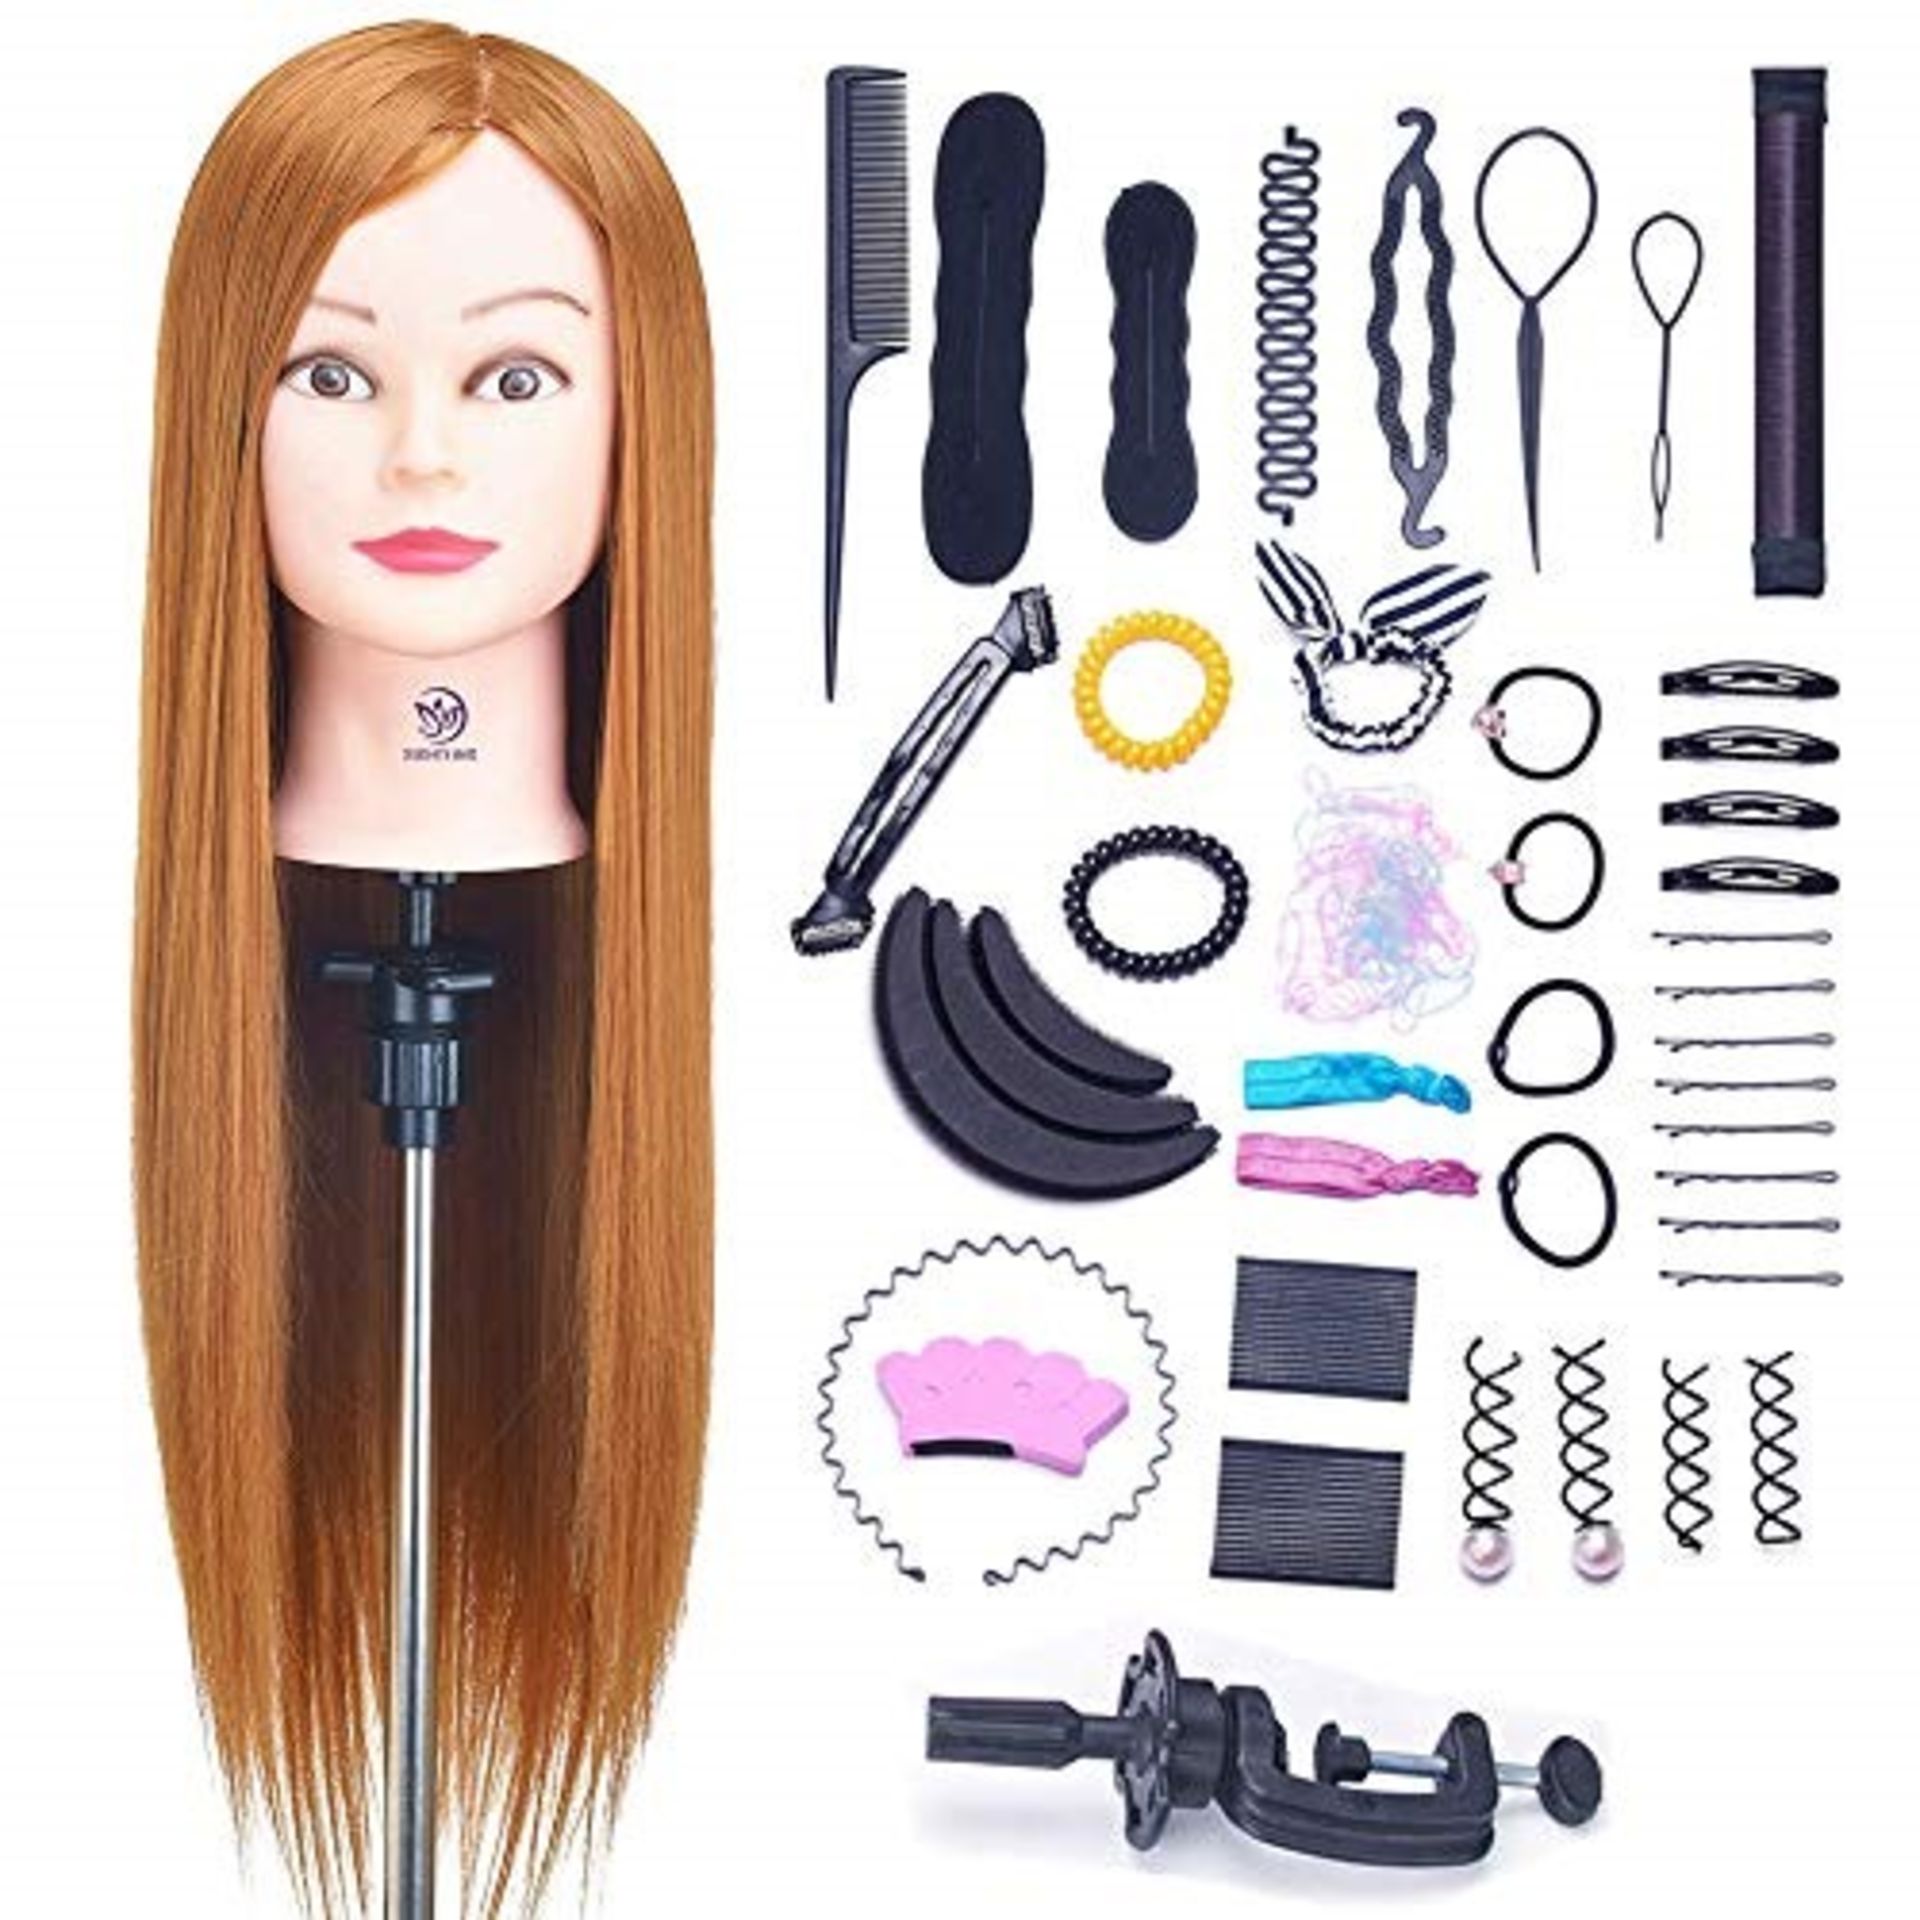 SIGHTLING 26inch 50% Real Human Hair Training He